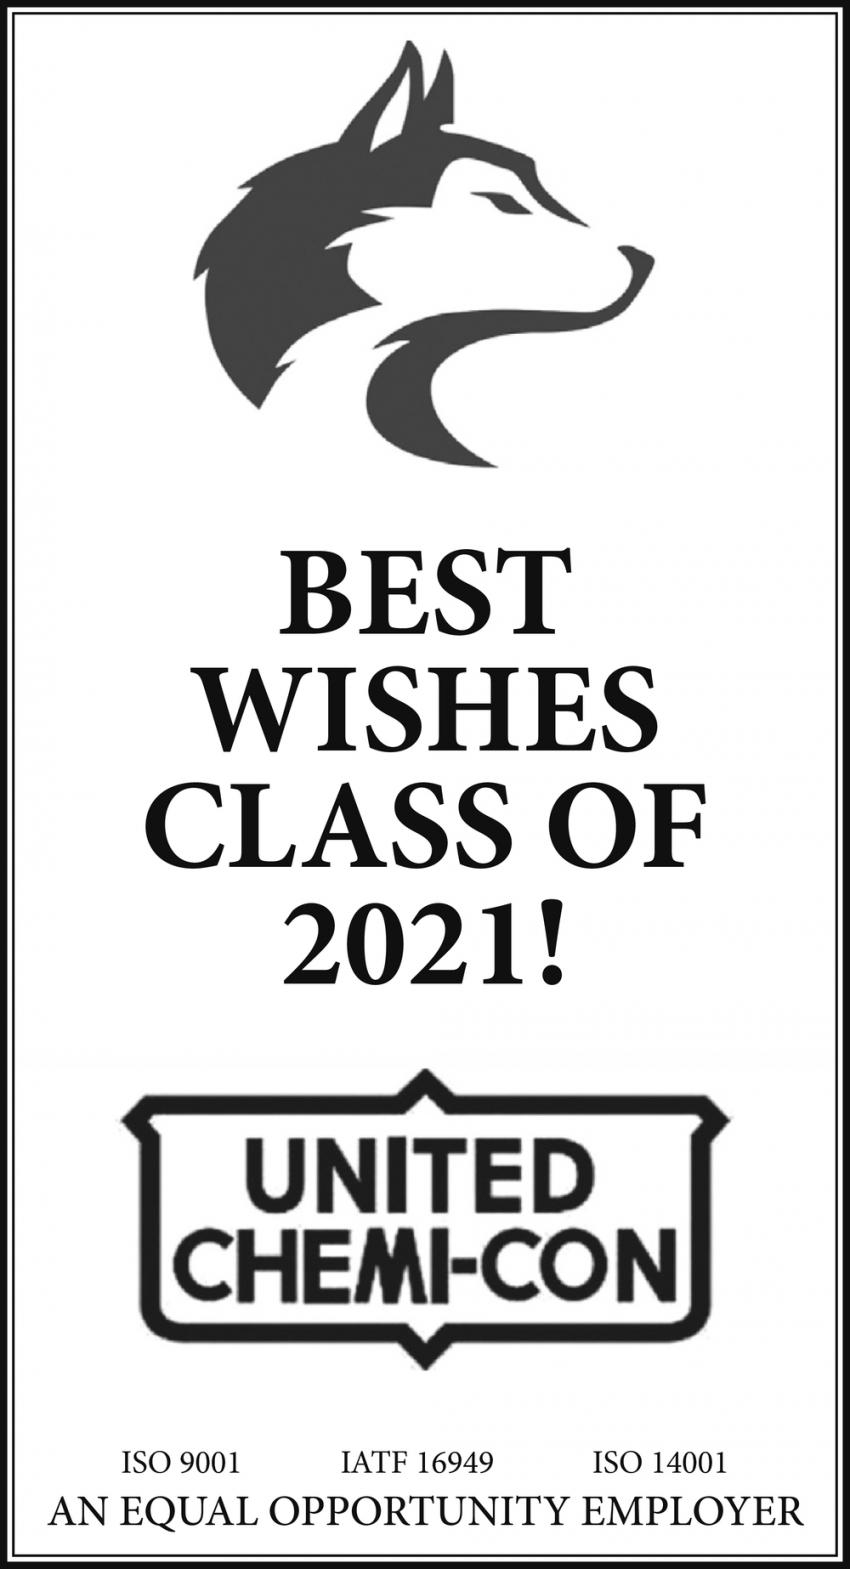 Best Wishes Class of 2021!